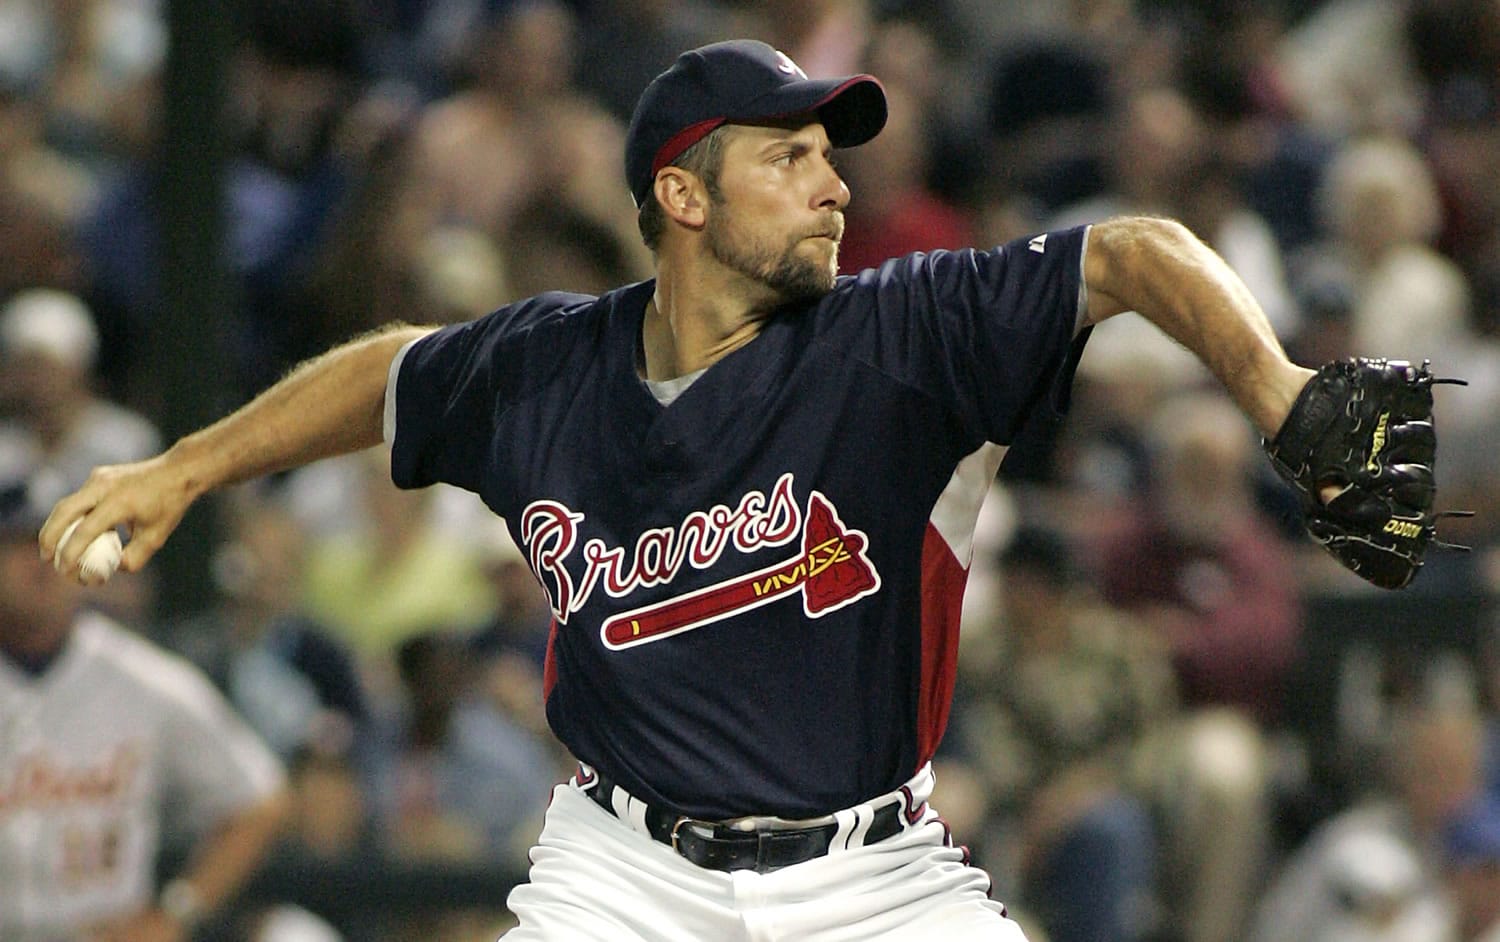 In this March 27, 2007, file photo, Atlanta Braves pitcher John Smoltz throws in the fourth inning of a spring training baseball game against the Detroit Tigers in Lake Buena Vista, Fla.